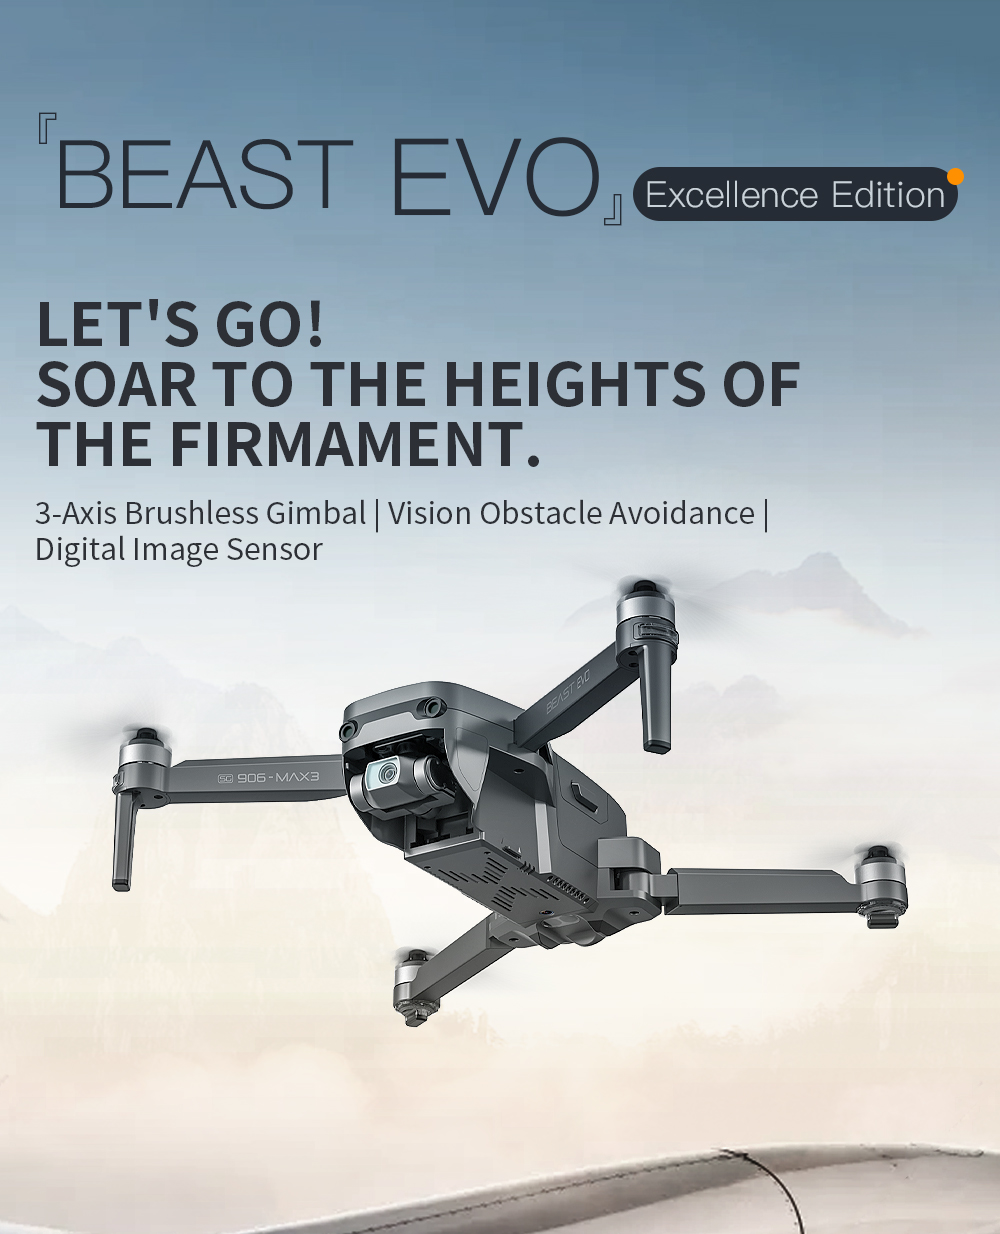 ZLL SG906 MAX3 BEAST EVO GPS 4KM Repeater Digital FPV with 4K EIS Camera 3-Axis Brushless Gimbal Vision Obstacle Avoidance RC Drone Quadcopter RTF